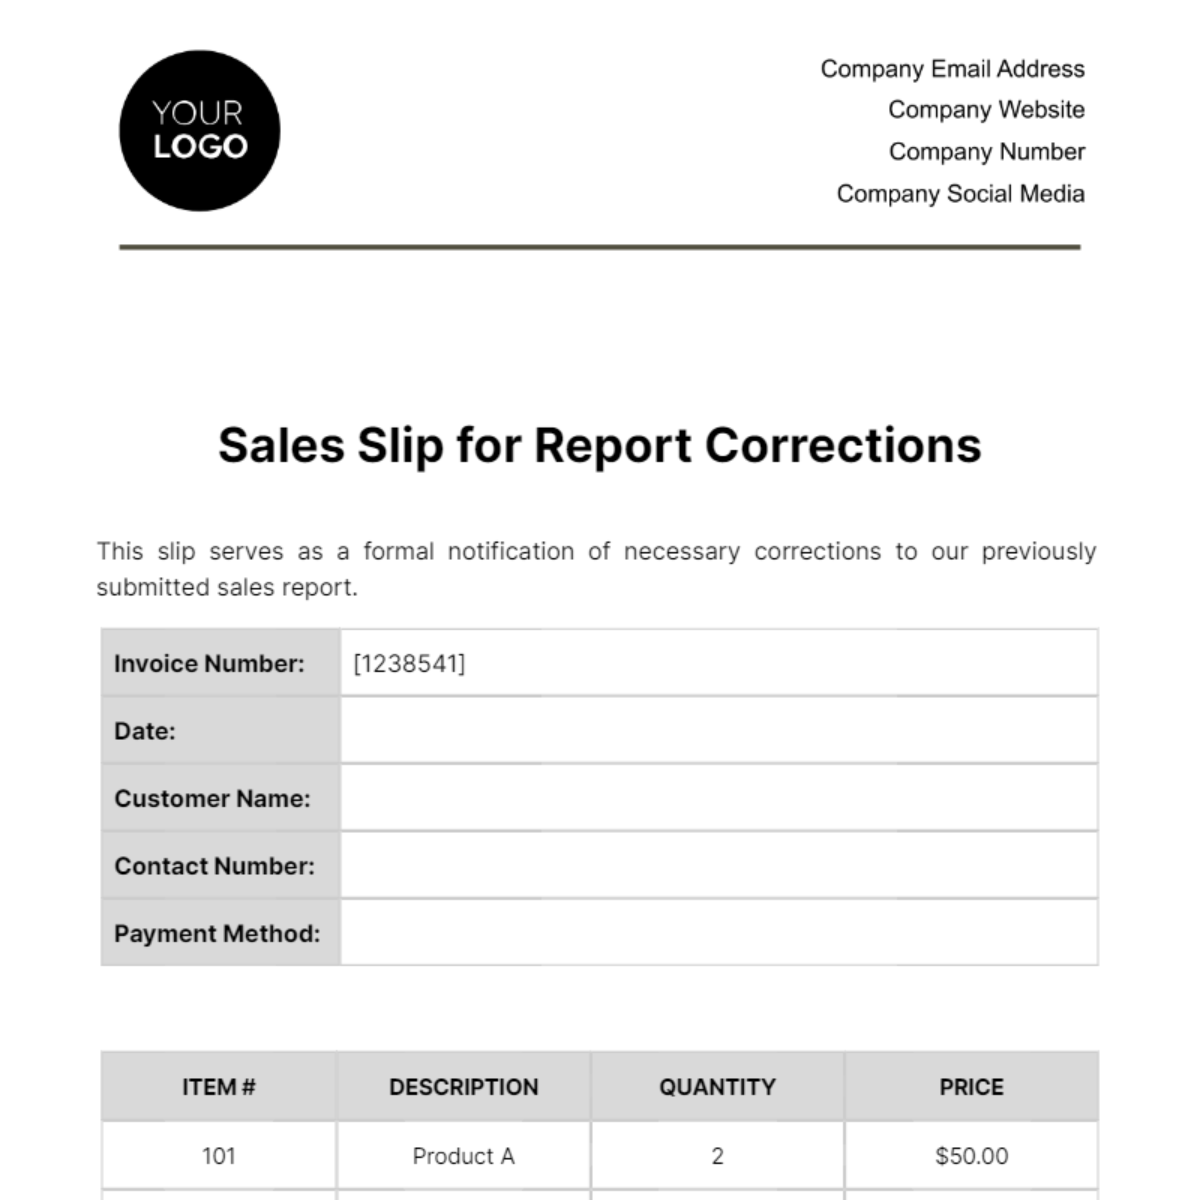 Sales Slip for Report Corrections Template